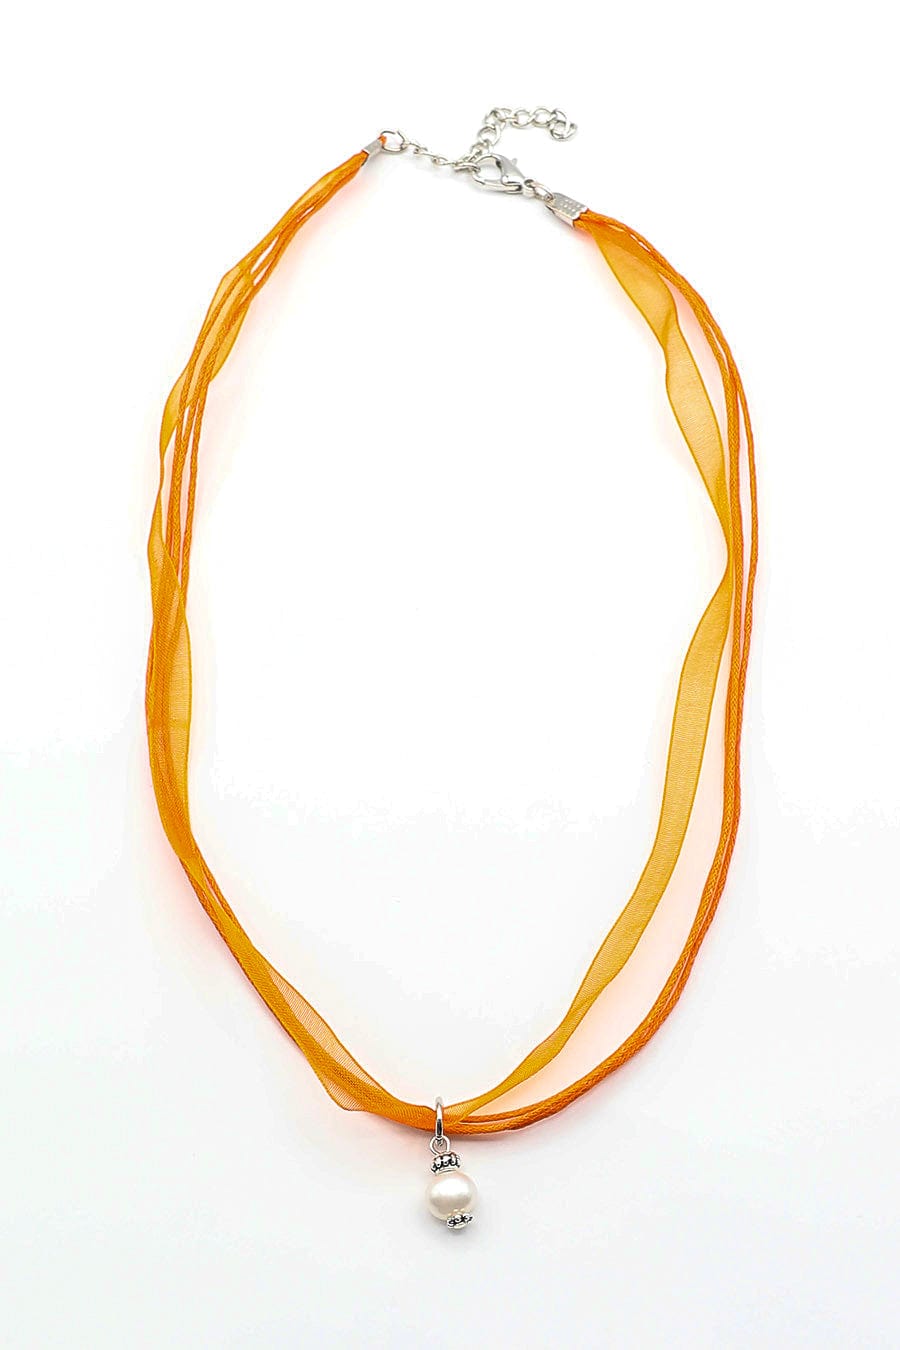 Orange Ribbon Necklace with Accent